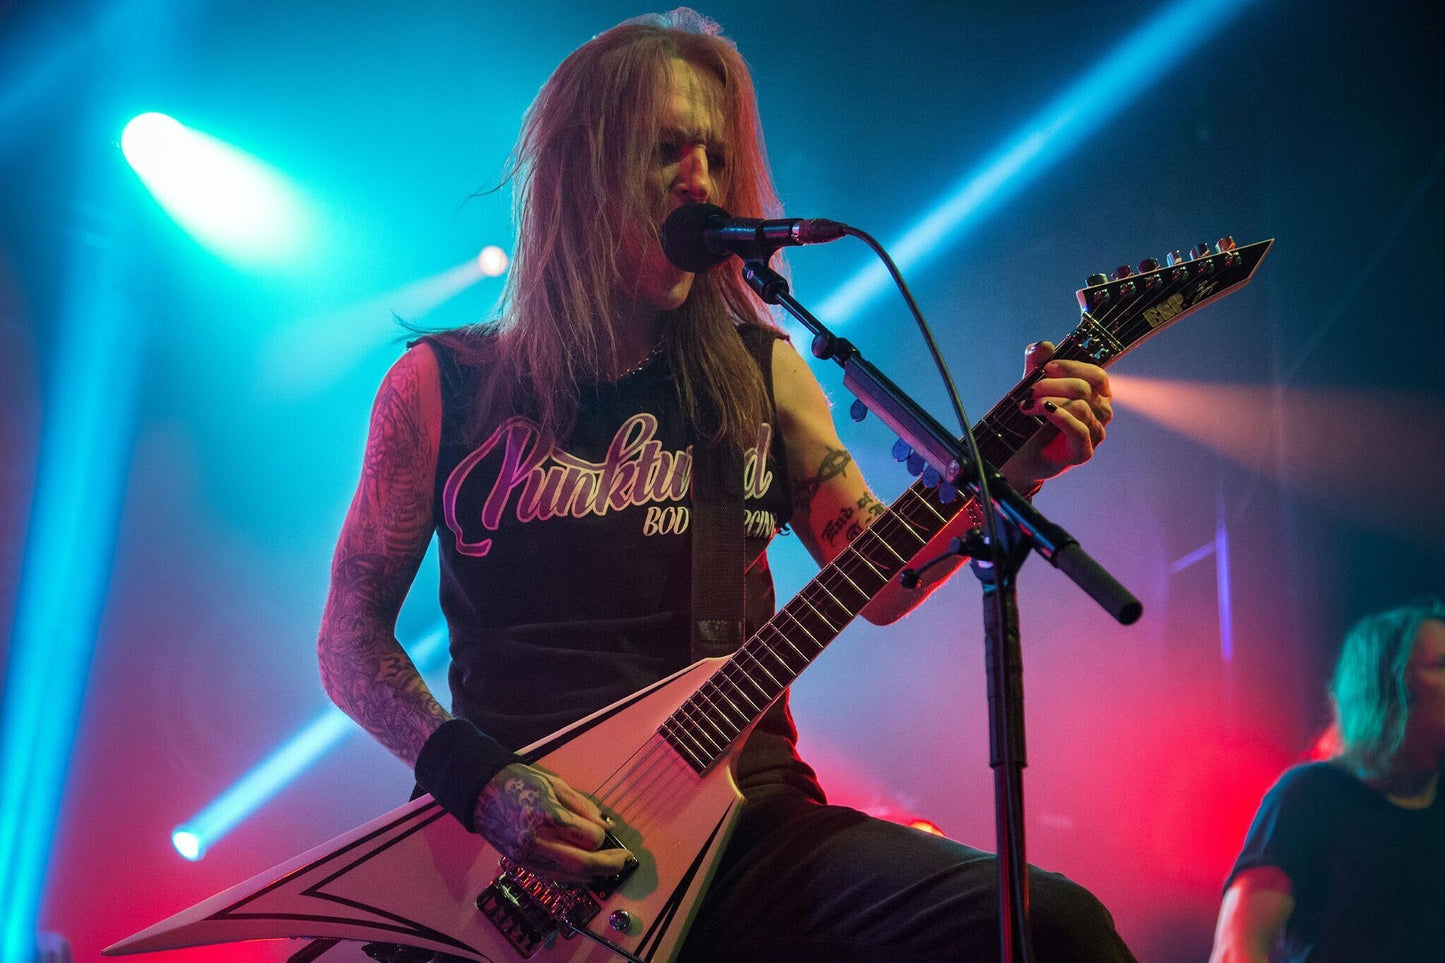 Children of Bodom - Alexi Laiho Playing Guitar on Stage Live at Tvornica Kulture in Zagreb Croatia - Poster 2